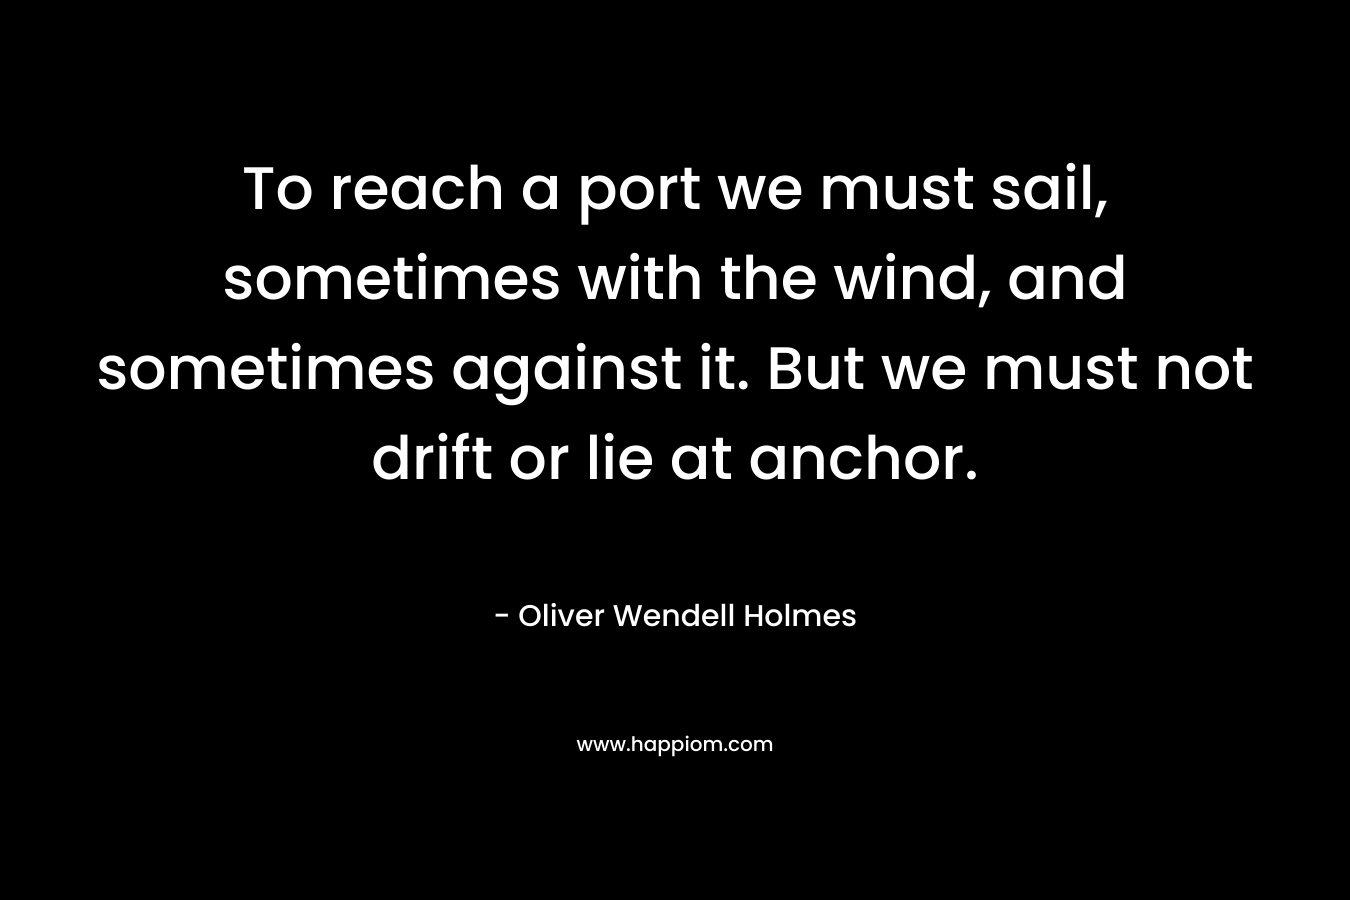 To reach a port we must sail, sometimes with the wind, and sometimes against it. But we must not drift or lie at anchor.